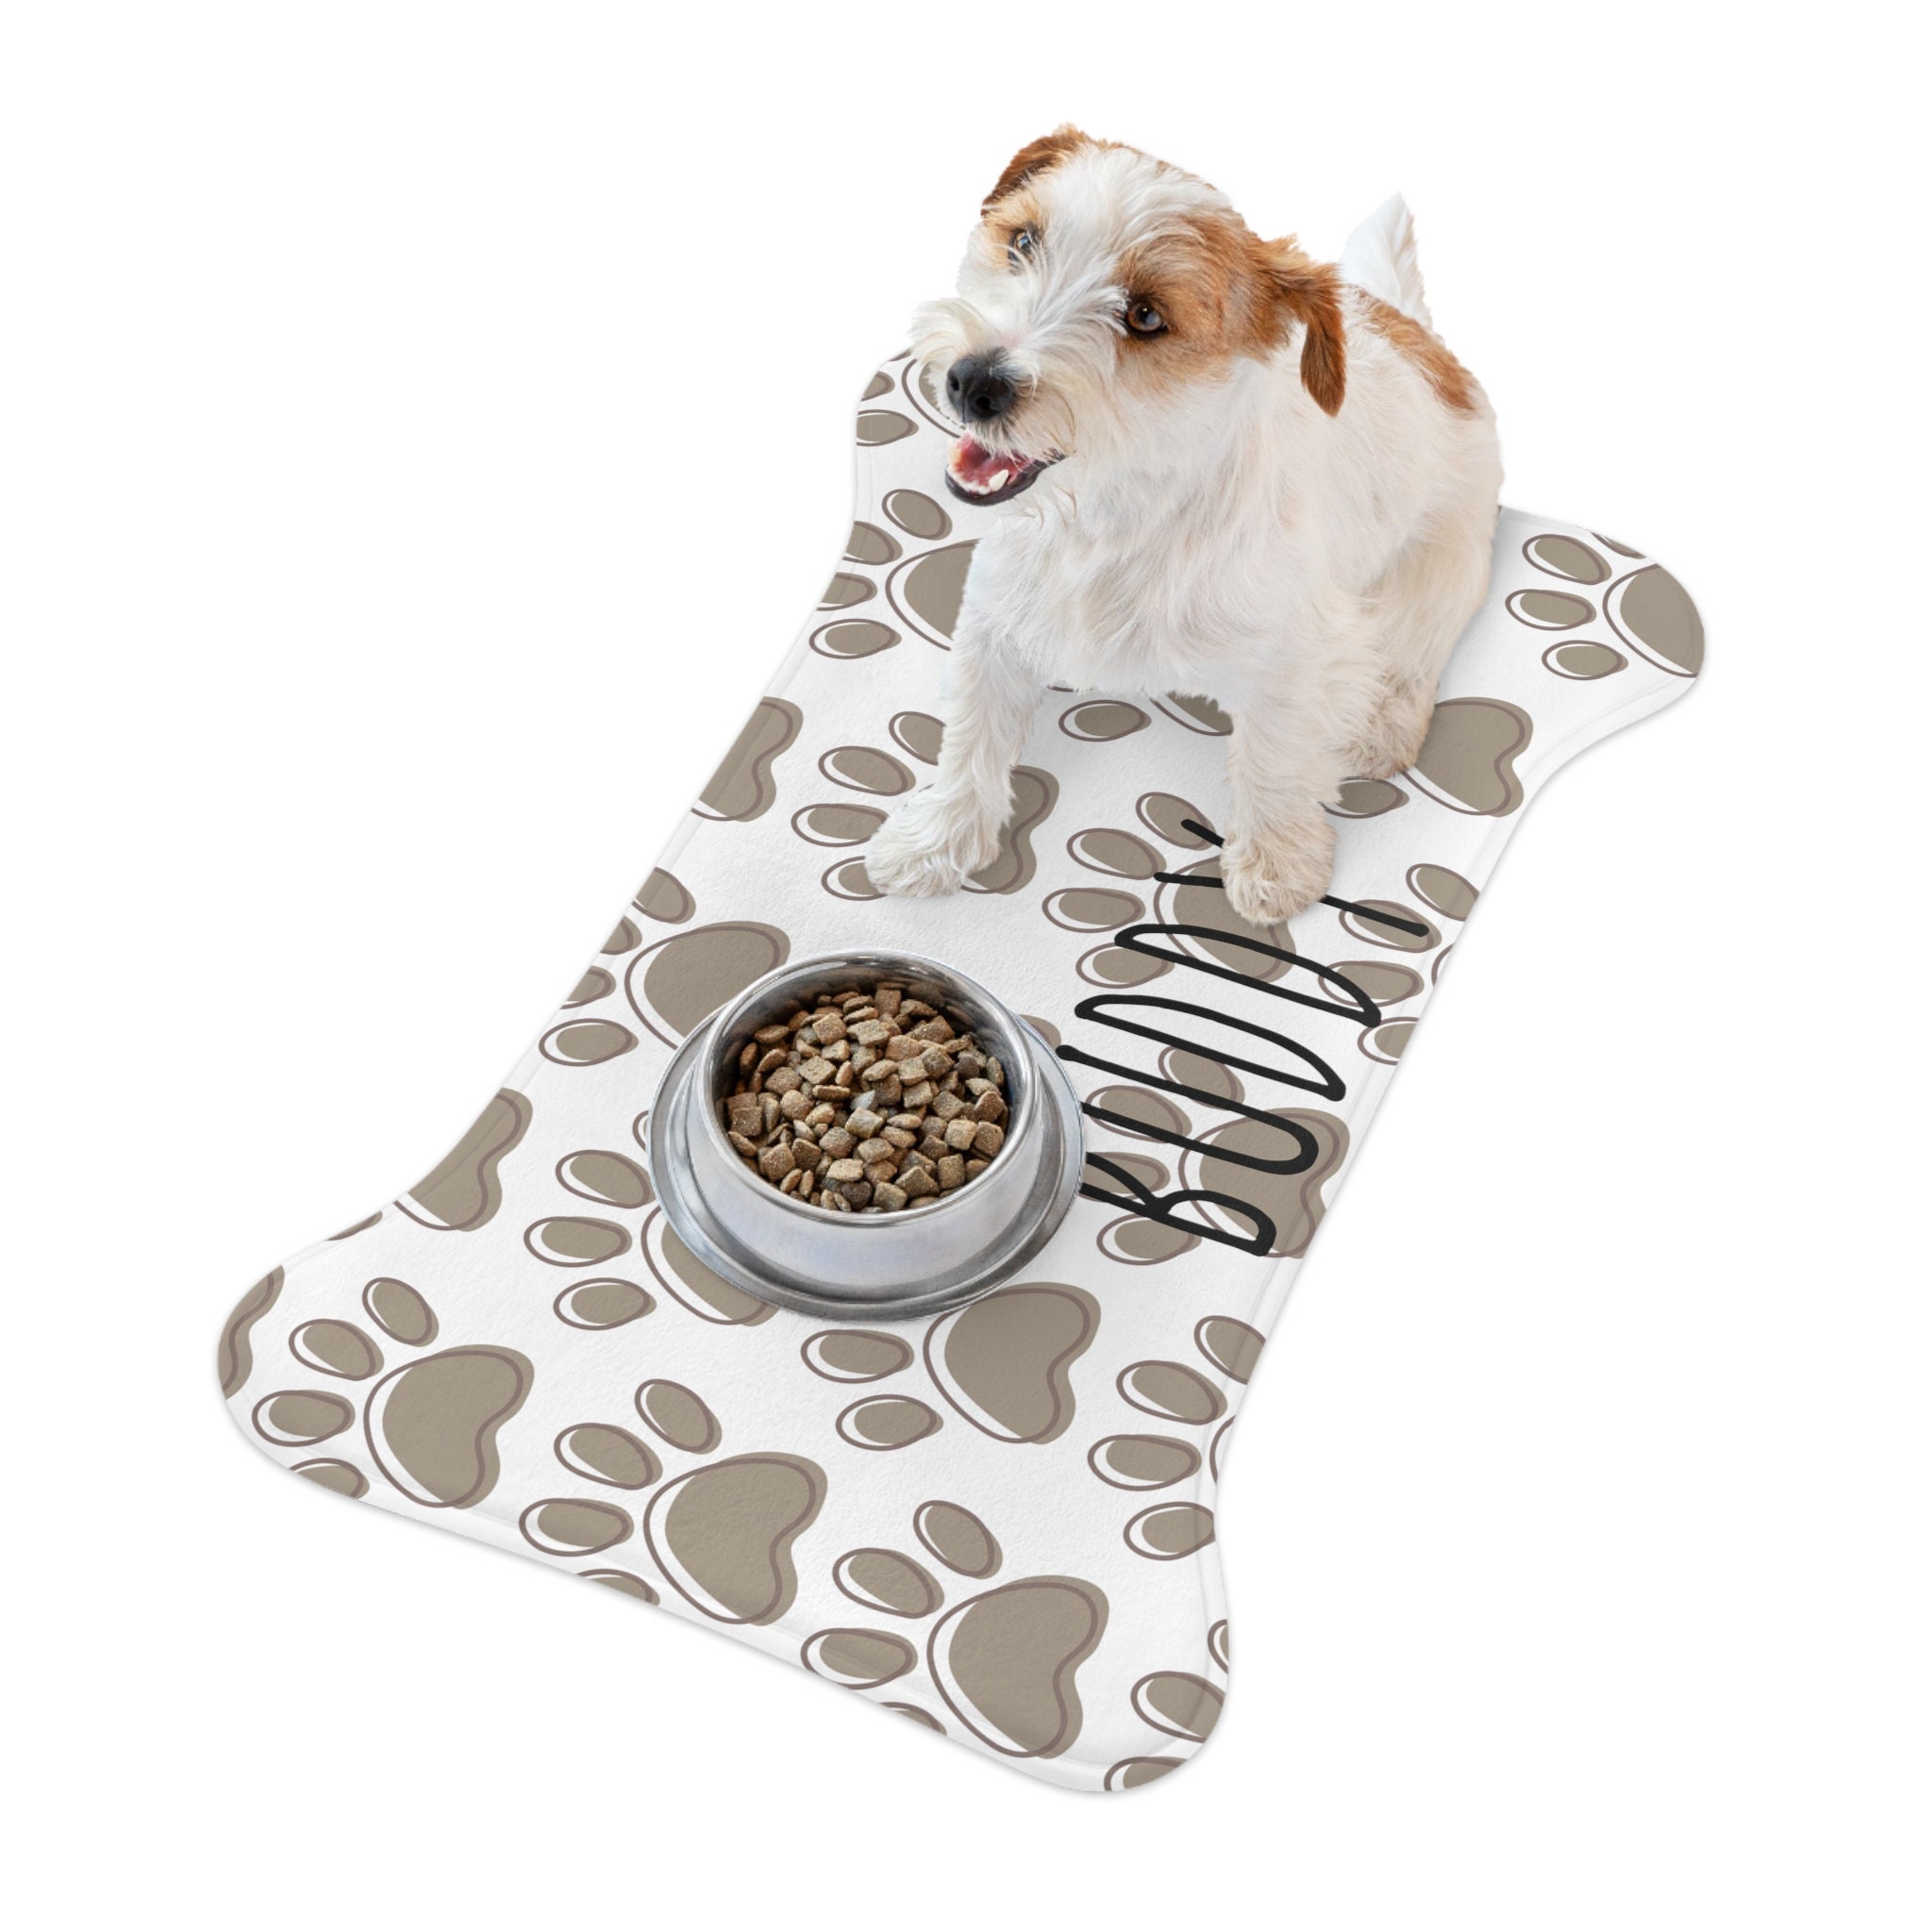  EAERSAN 17x23.6 Absorbent Dog Mat for Food and Water